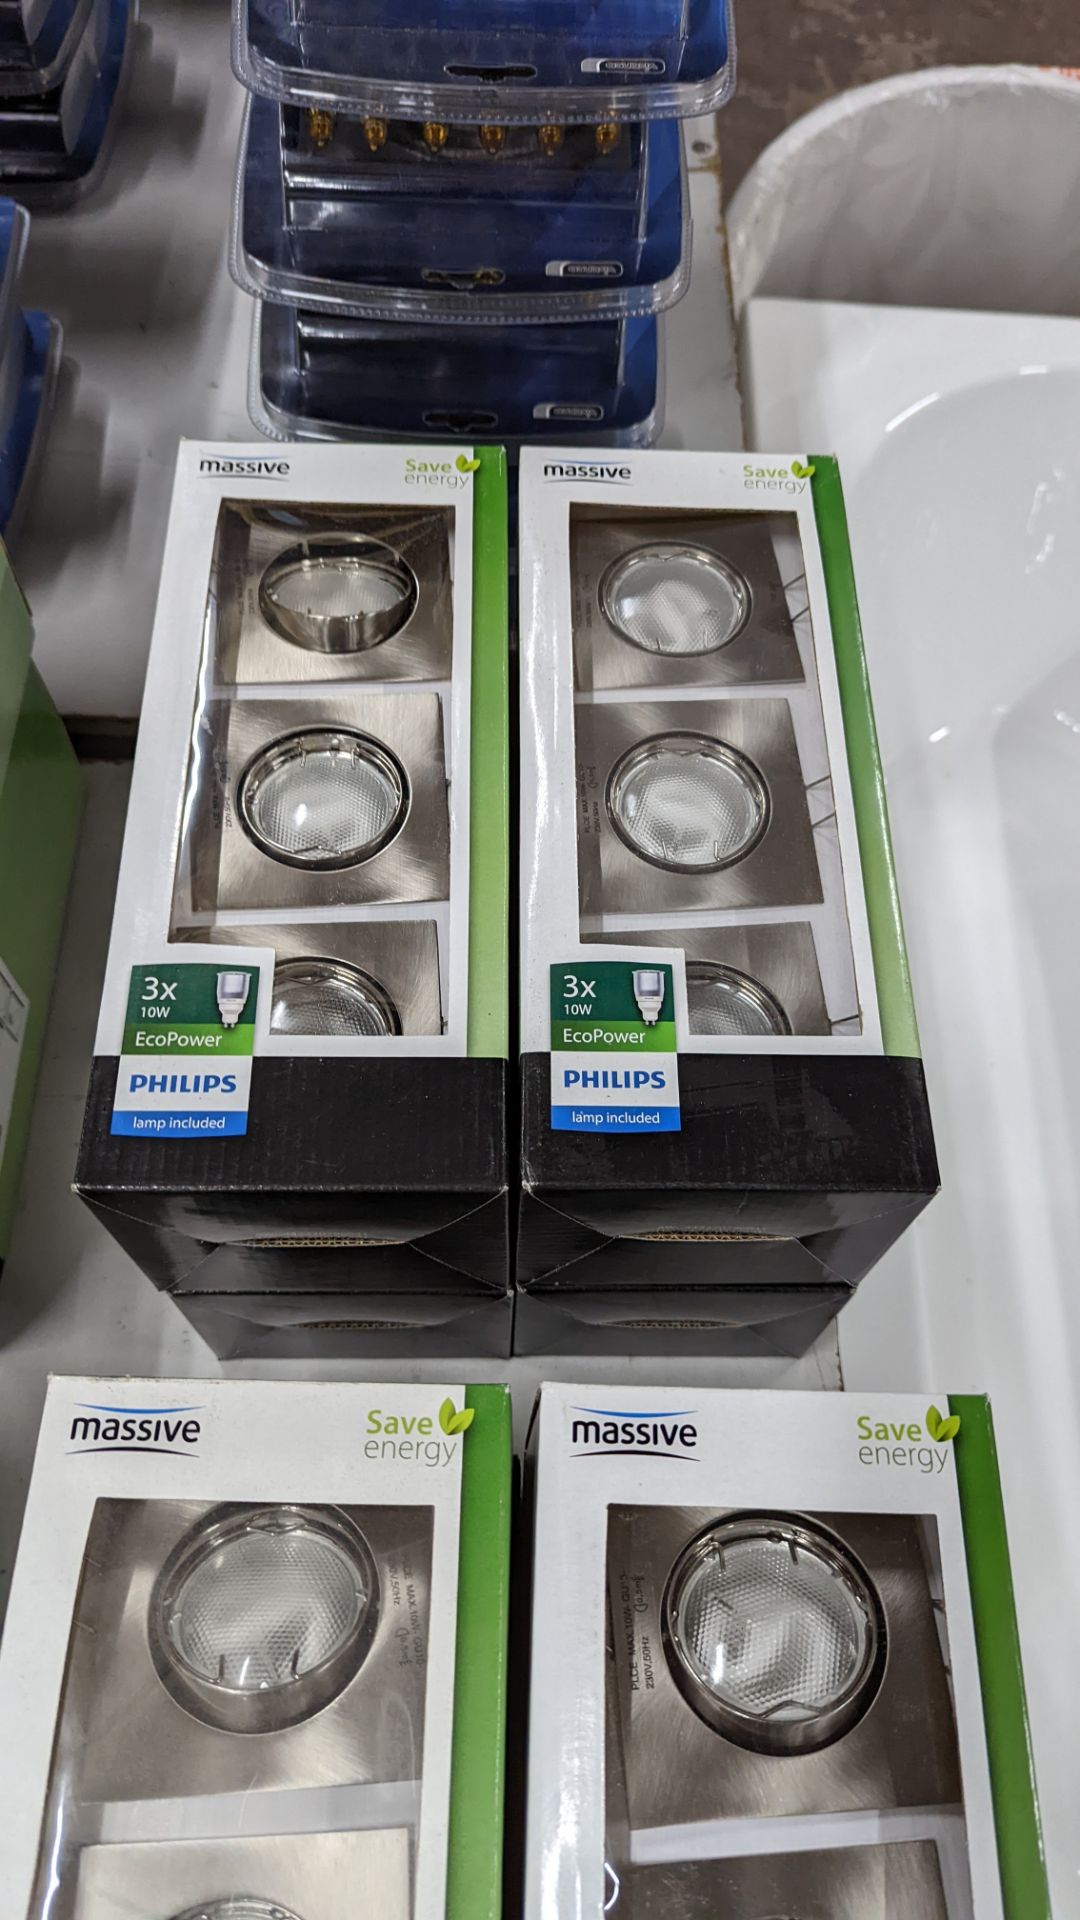 10 off Philips 3x10w Eco Power brushed chrome LED spotlights - this lot consists of 10 boxes which e - Image 5 of 5